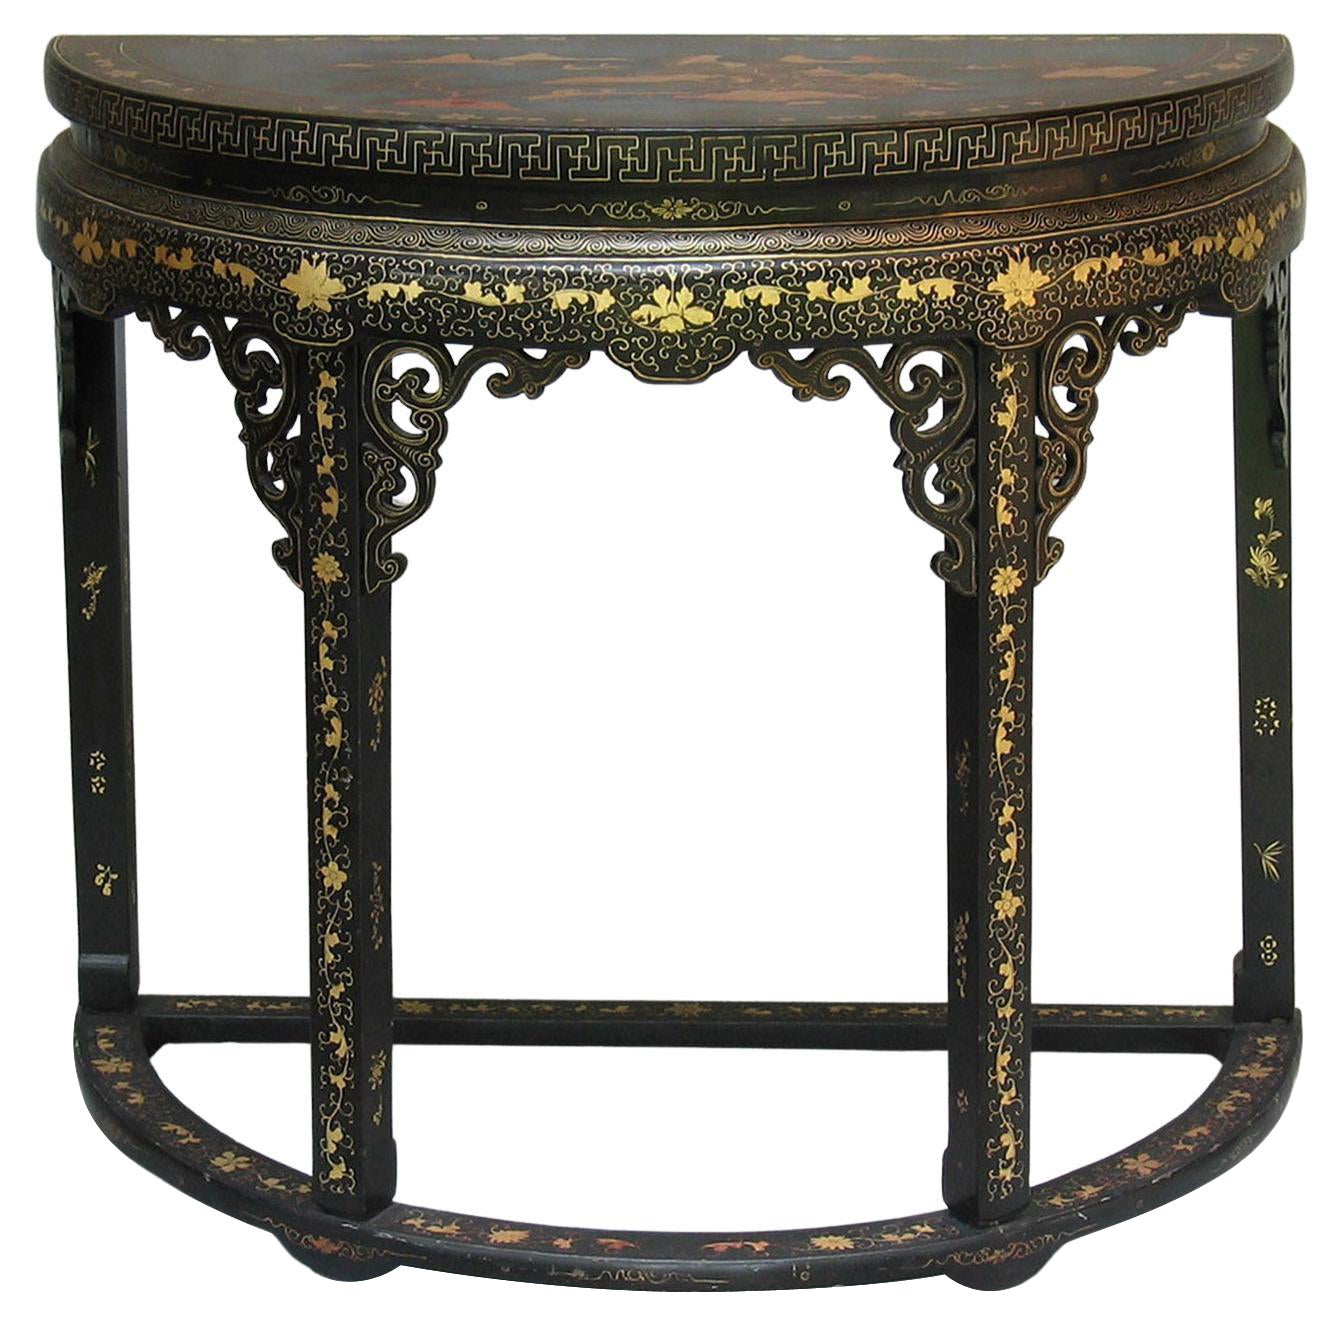 Chinese Export Gilt Lacquer Decorated Demi-lune Console Table Early 19th Century For Sale